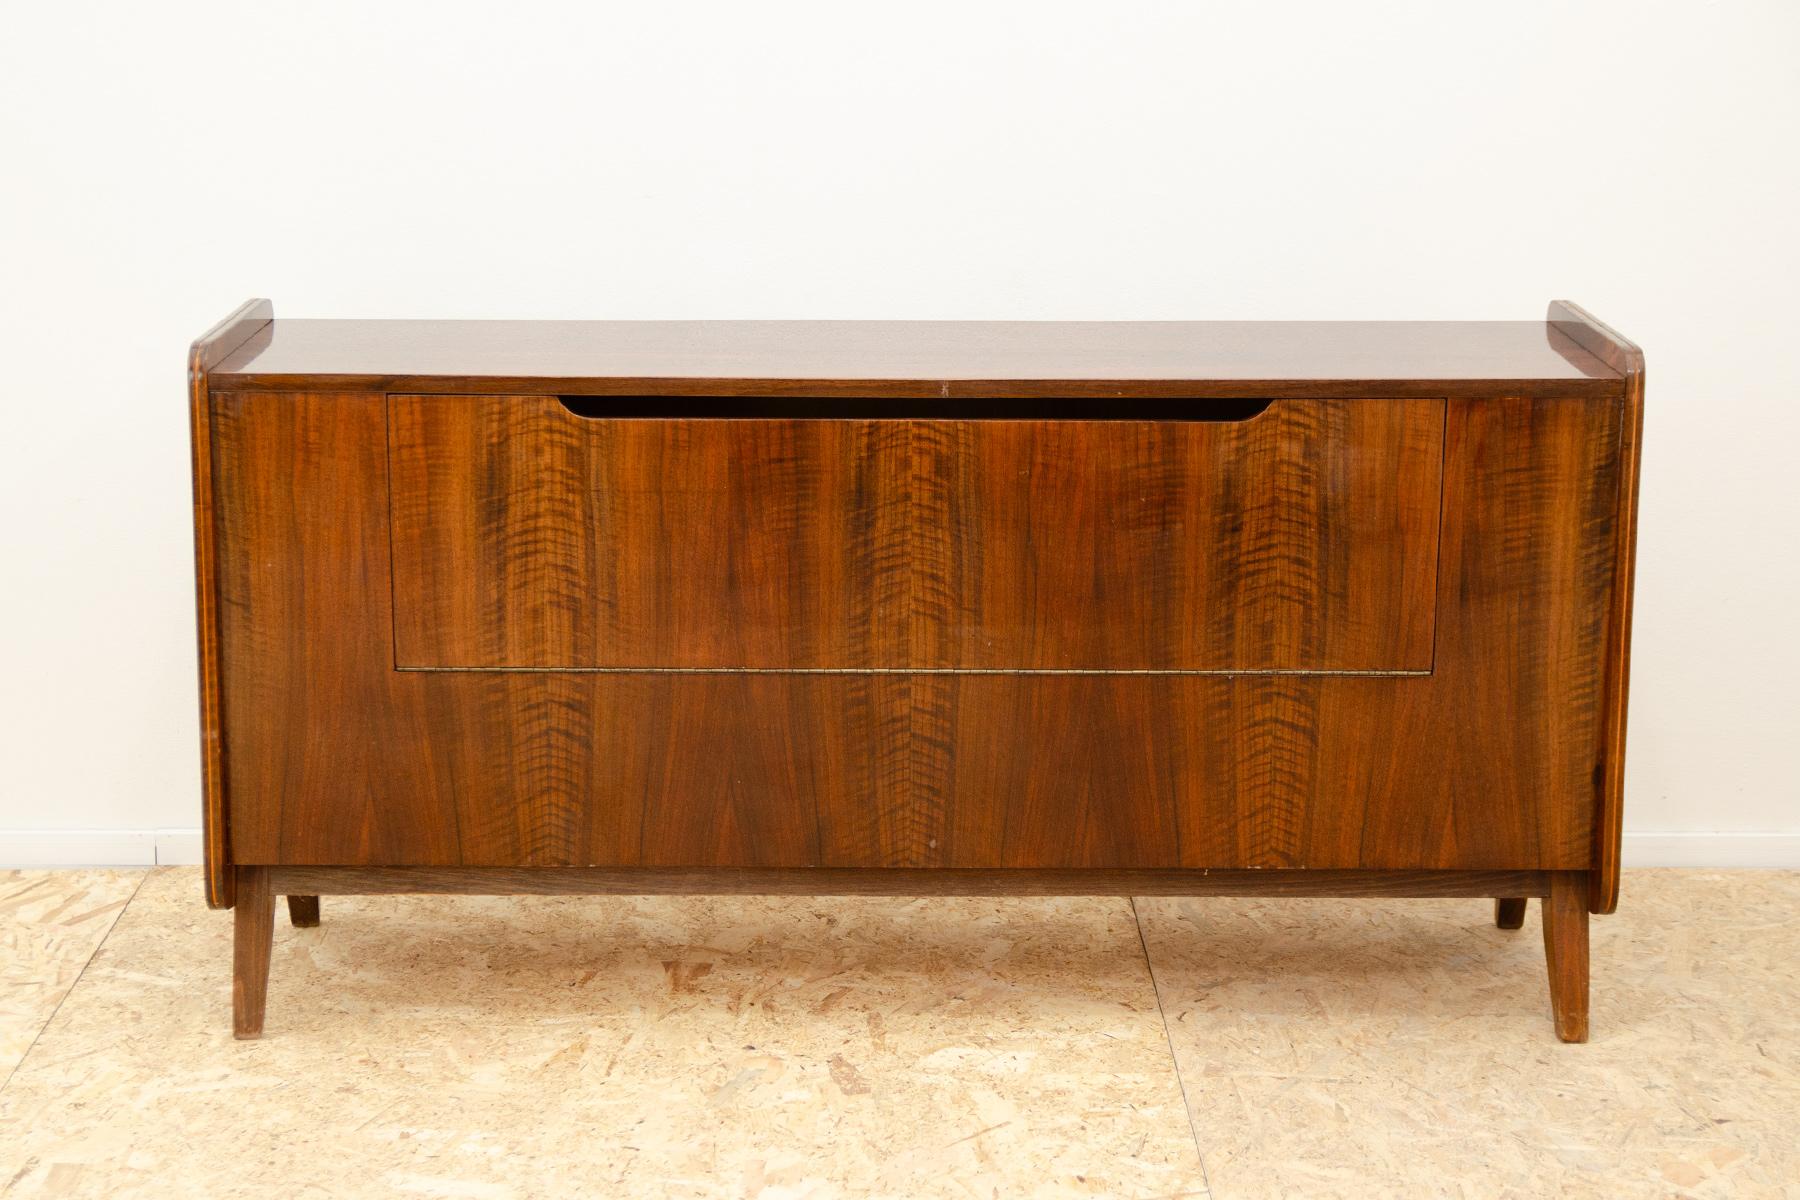 This mid century dresser was made in the former Czechoslovakia in the 1970´s. It was designed by František Jirák fo Tatra nábytok company. It has beautiful walnut veneer. It can also be used as a TV table or bar.
In very good Vintage condition,